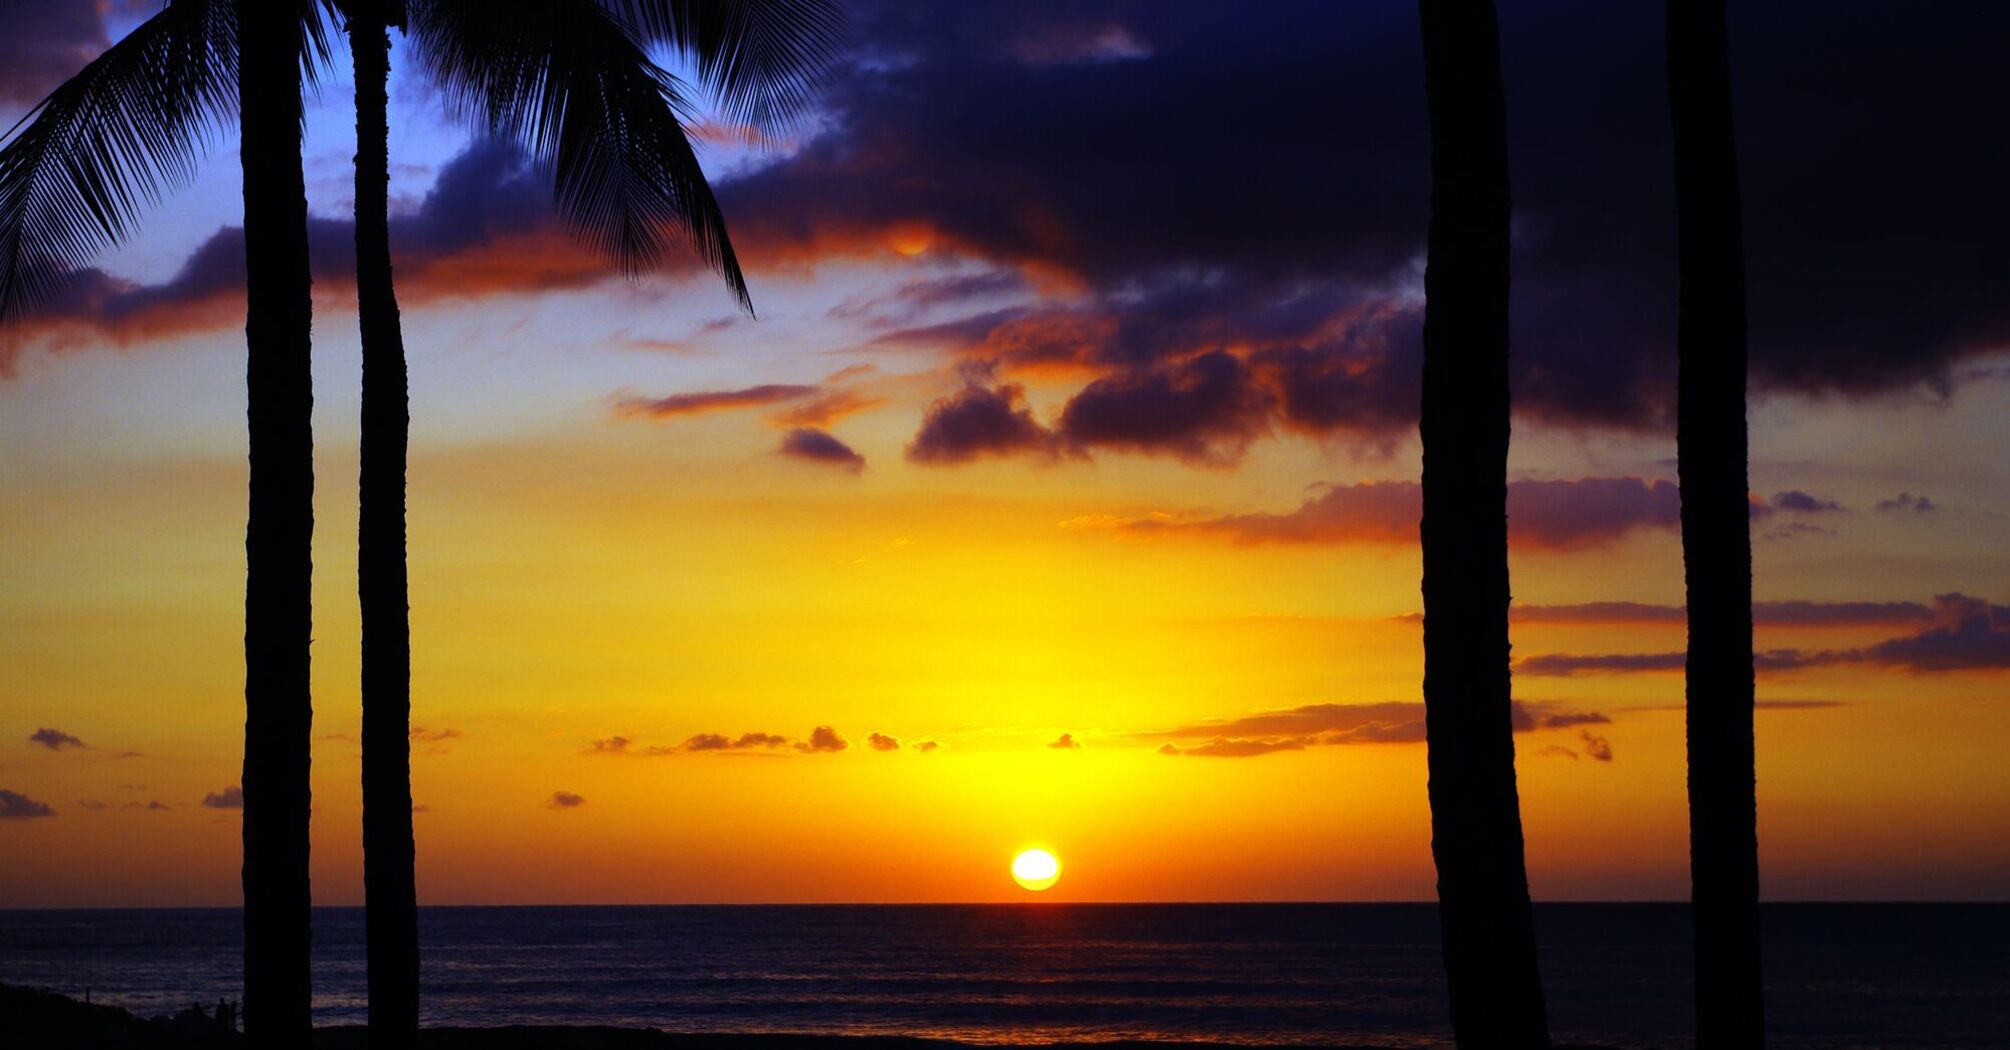 A vivid sunrise over a calm ocean viewed between silhouetted palm trees in Hawaii